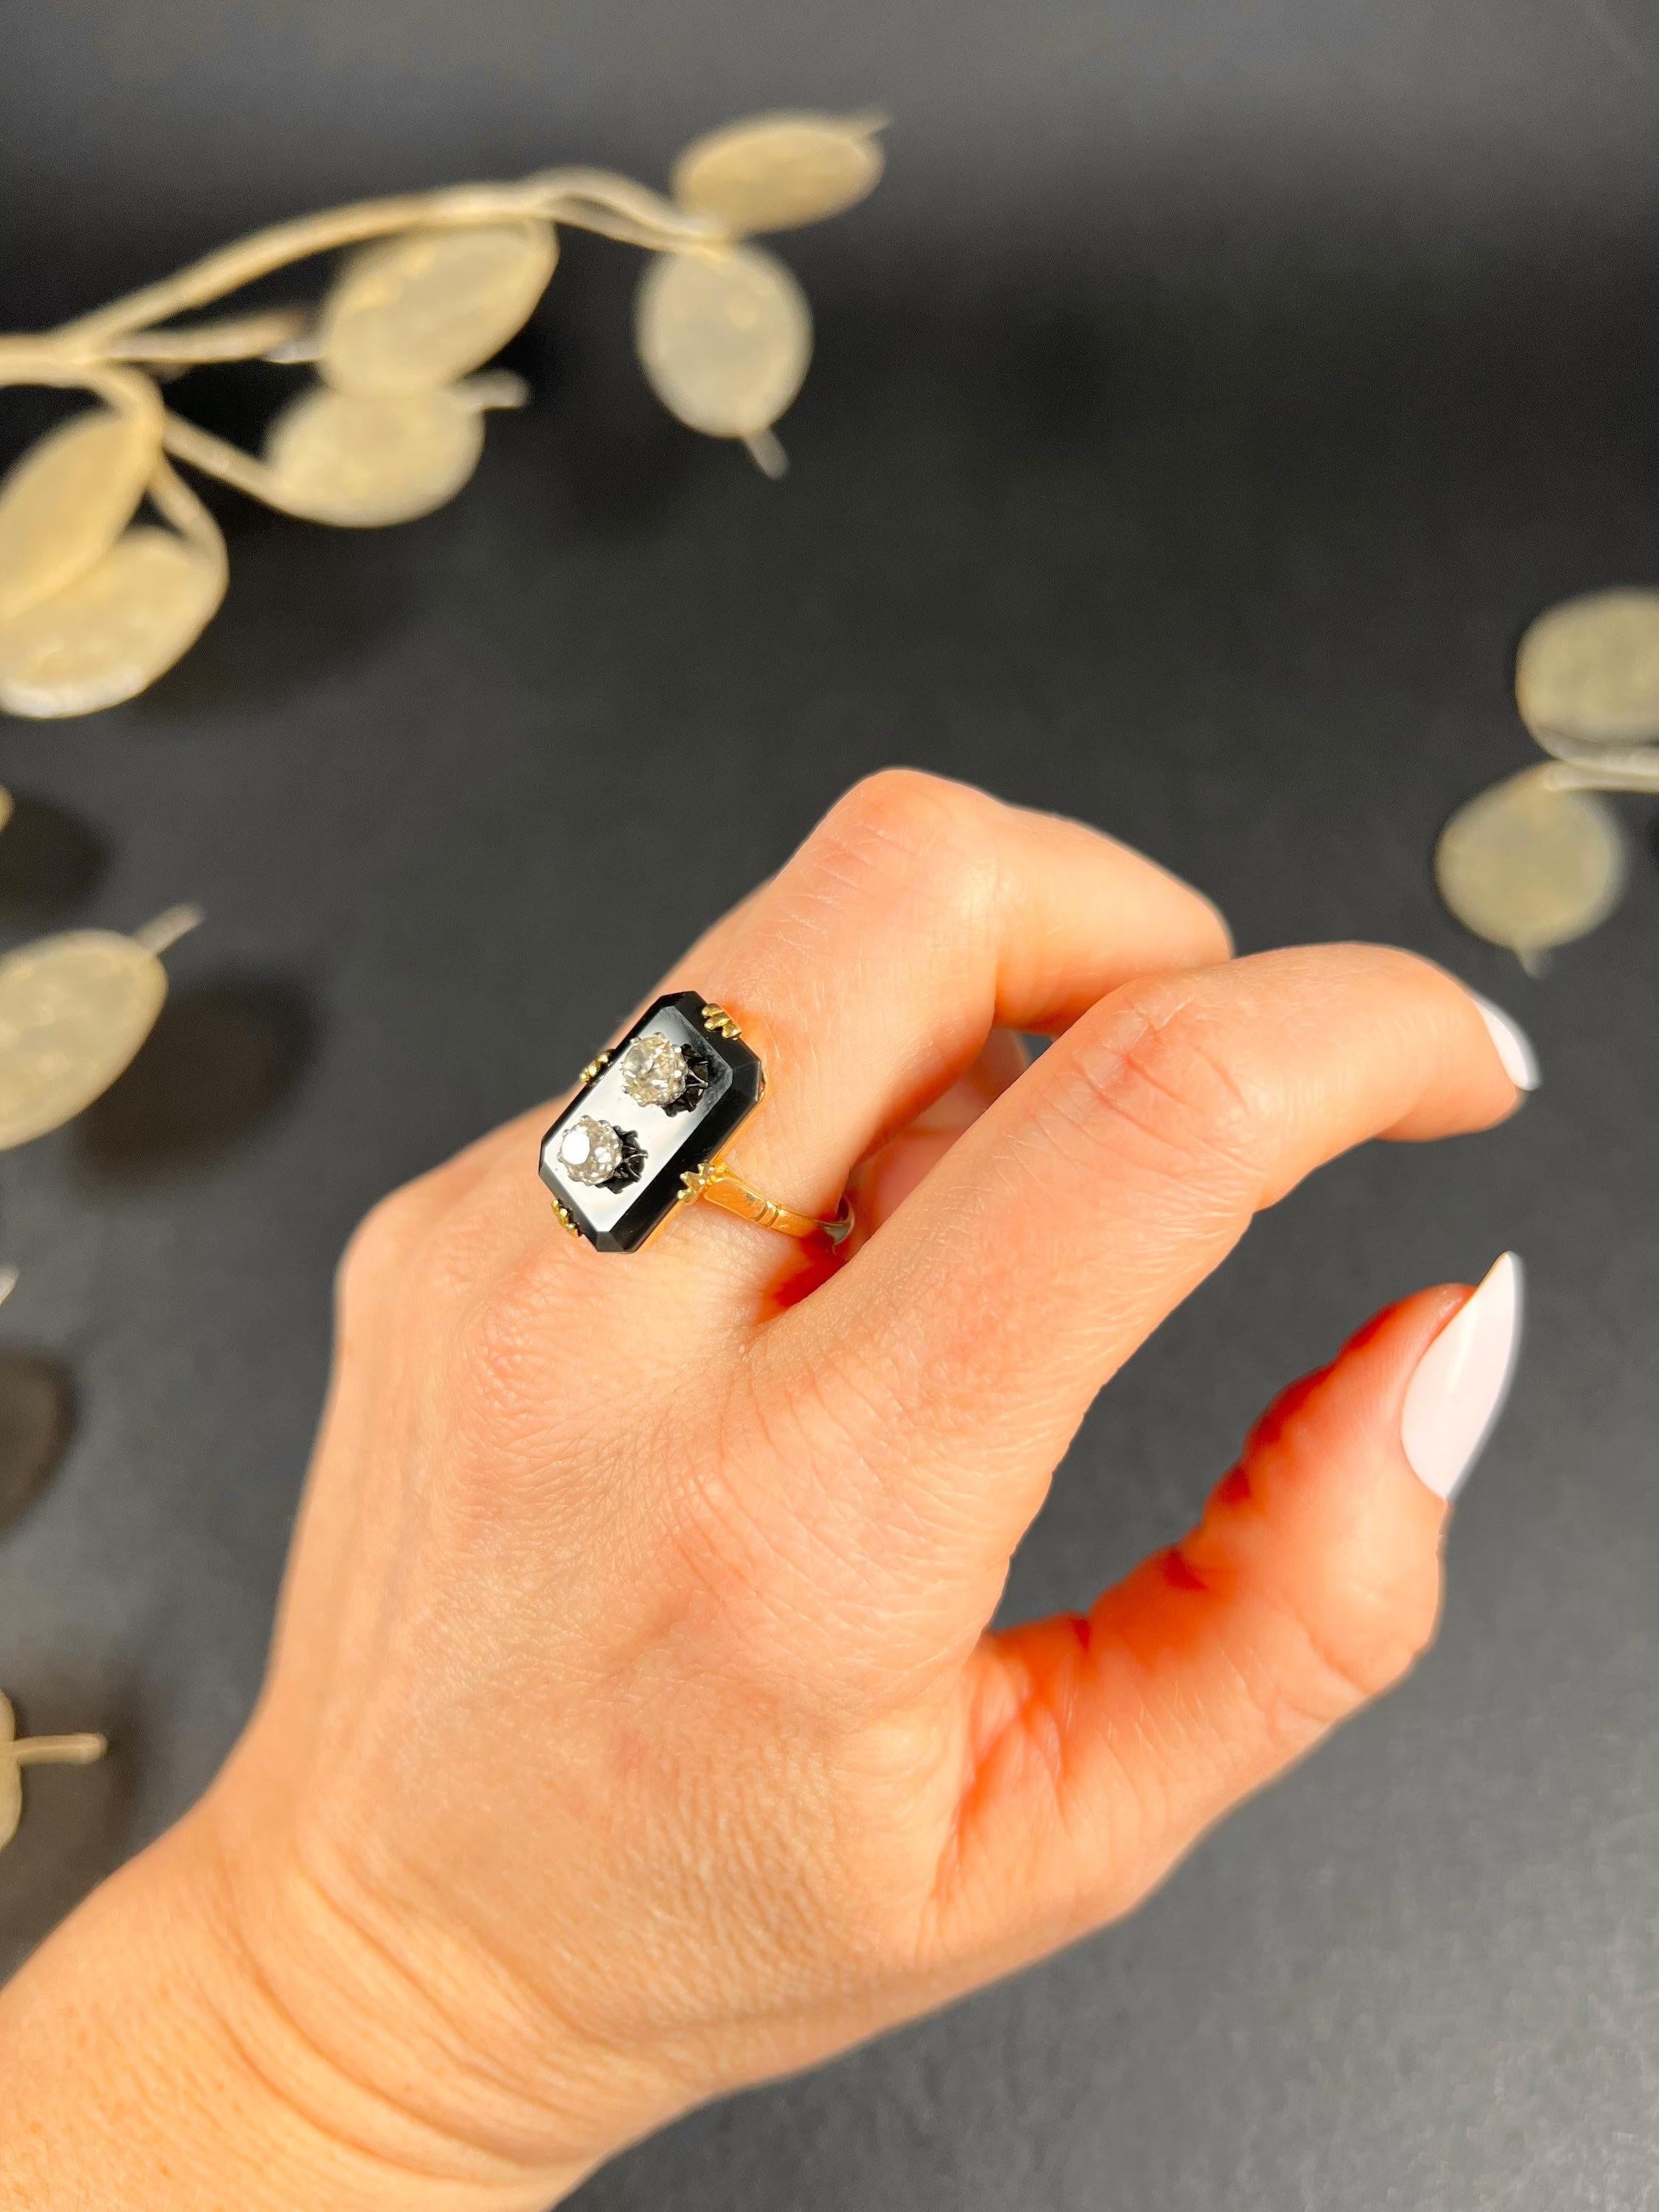 Antique Onyx Ring

18ct Gold Tested

Circa 1920’s 

Lovely, rectangular antique ring. Set with a great sized flat onyx & two old European cut diamonds. Mounted on an 18ct yellow gold band. 

Face of the ring measures approx height 19mm & width